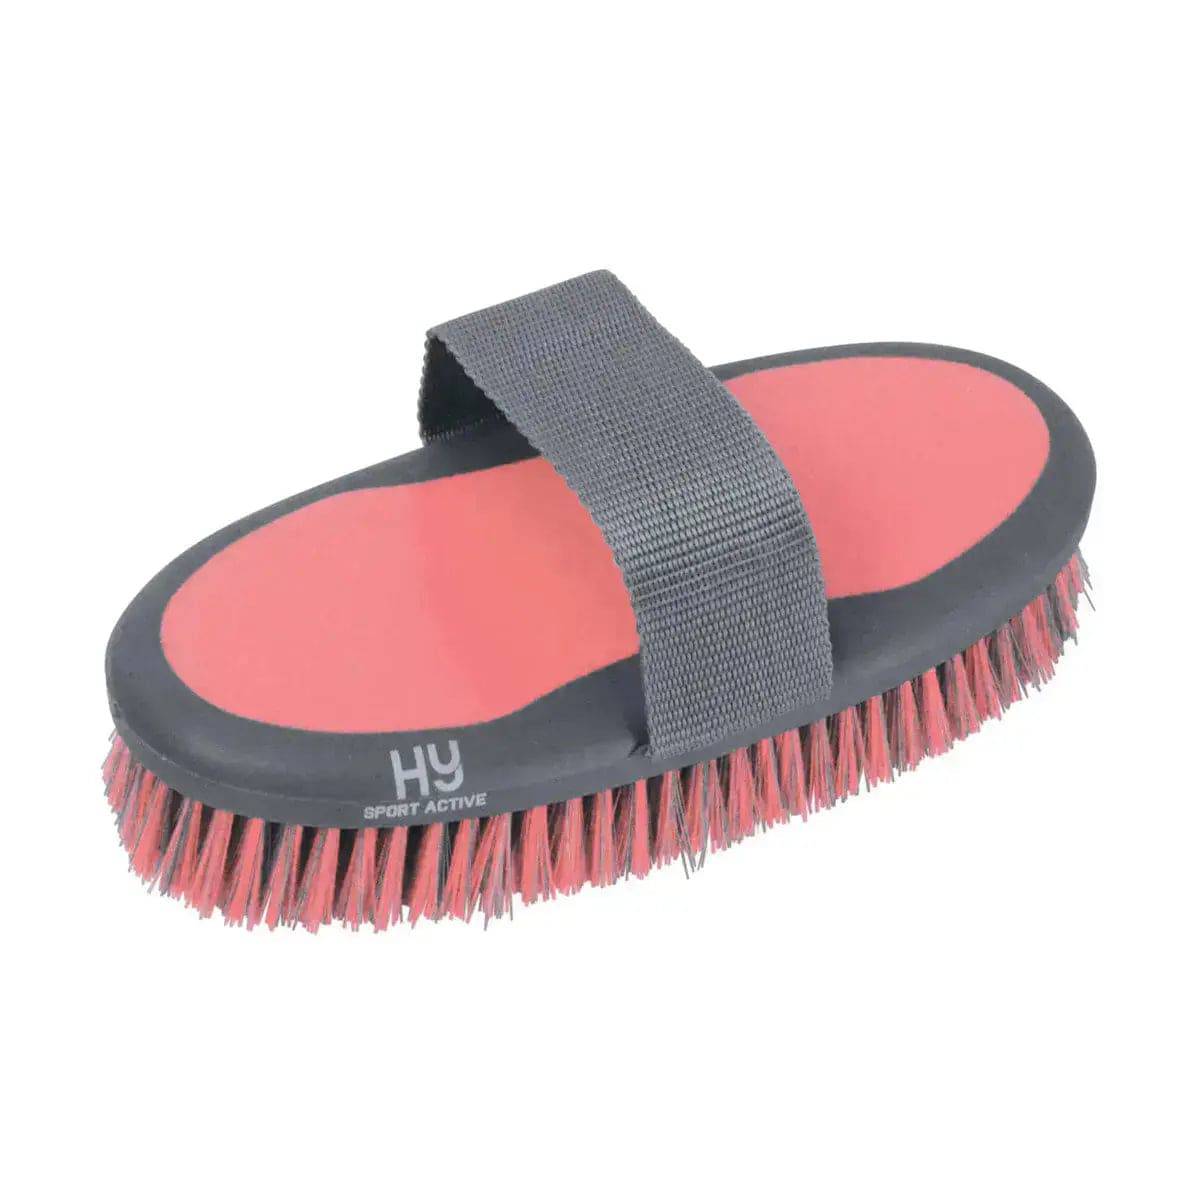 Hy Sport Active Sponge Brush Coral Rose HY Equestrian Brushes & Combs Barnstaple Equestrian Supplies